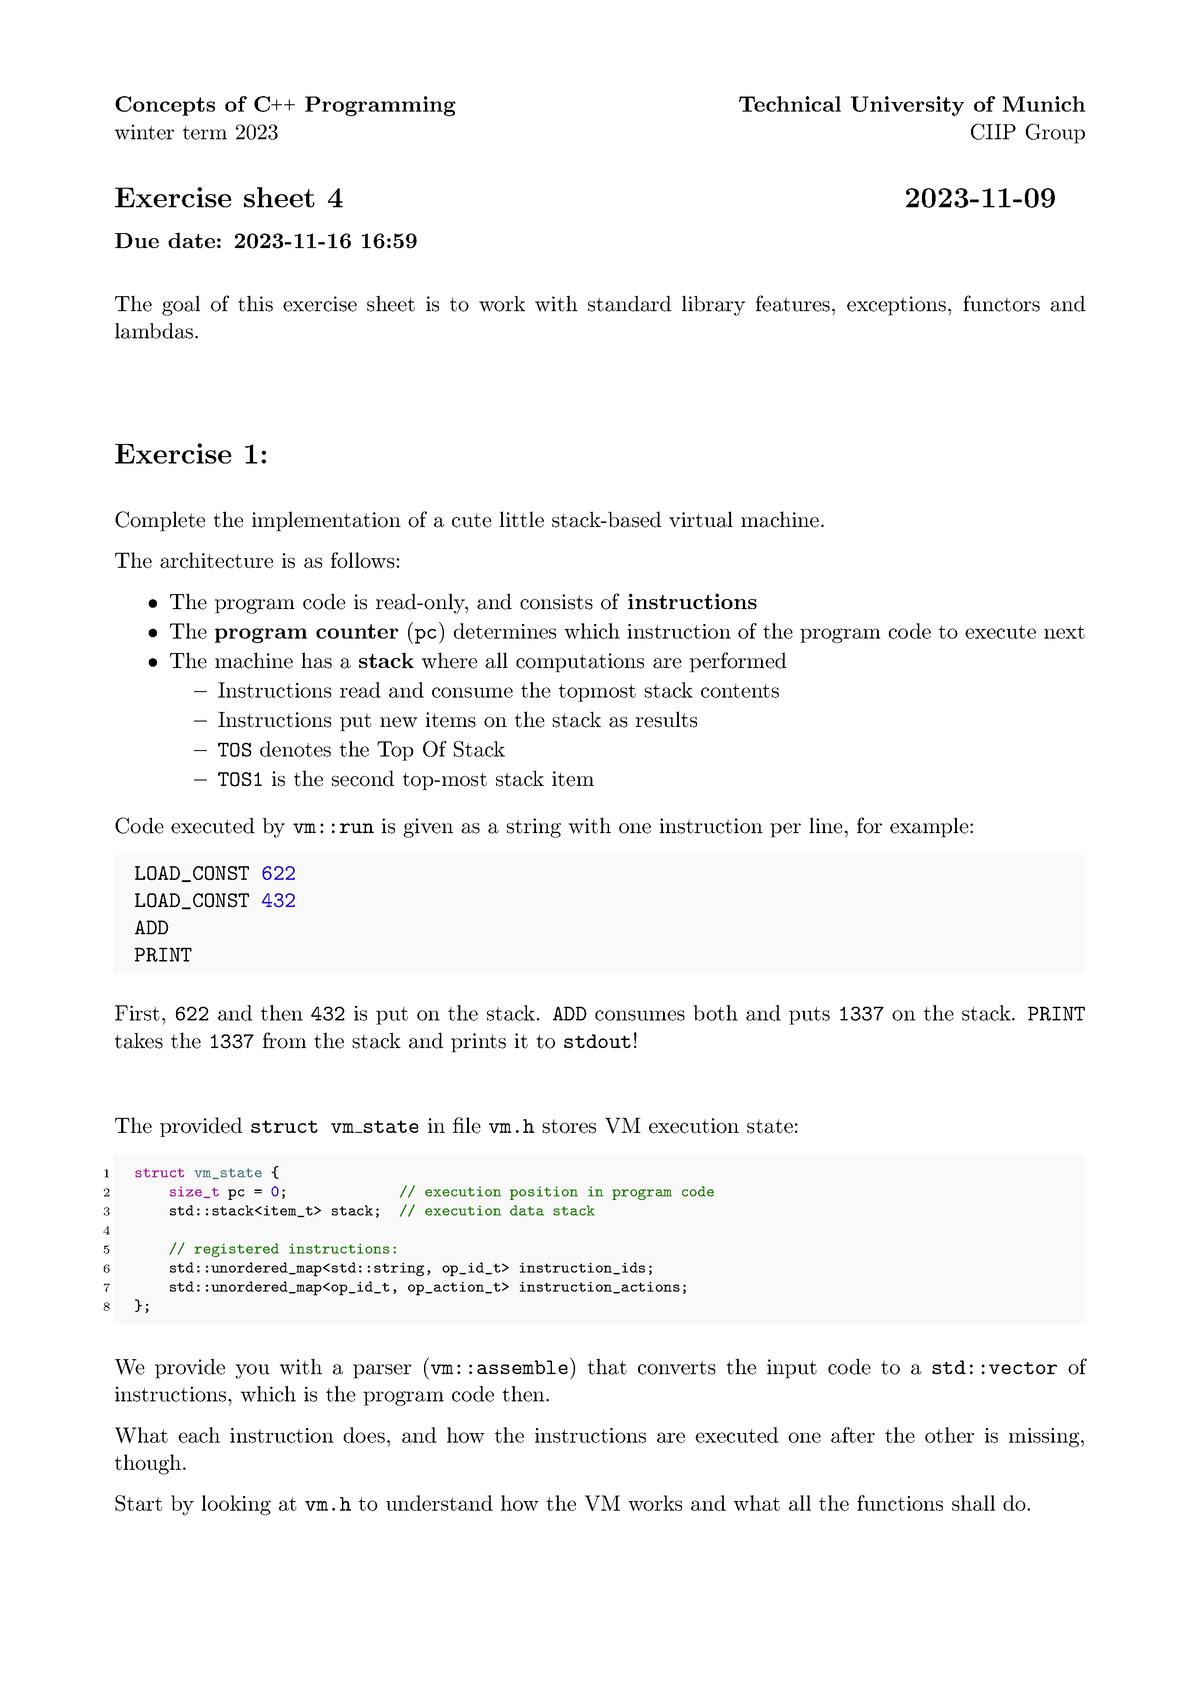 Exercises-sheet 04 - Concepts of C++ Programming Technical University ...